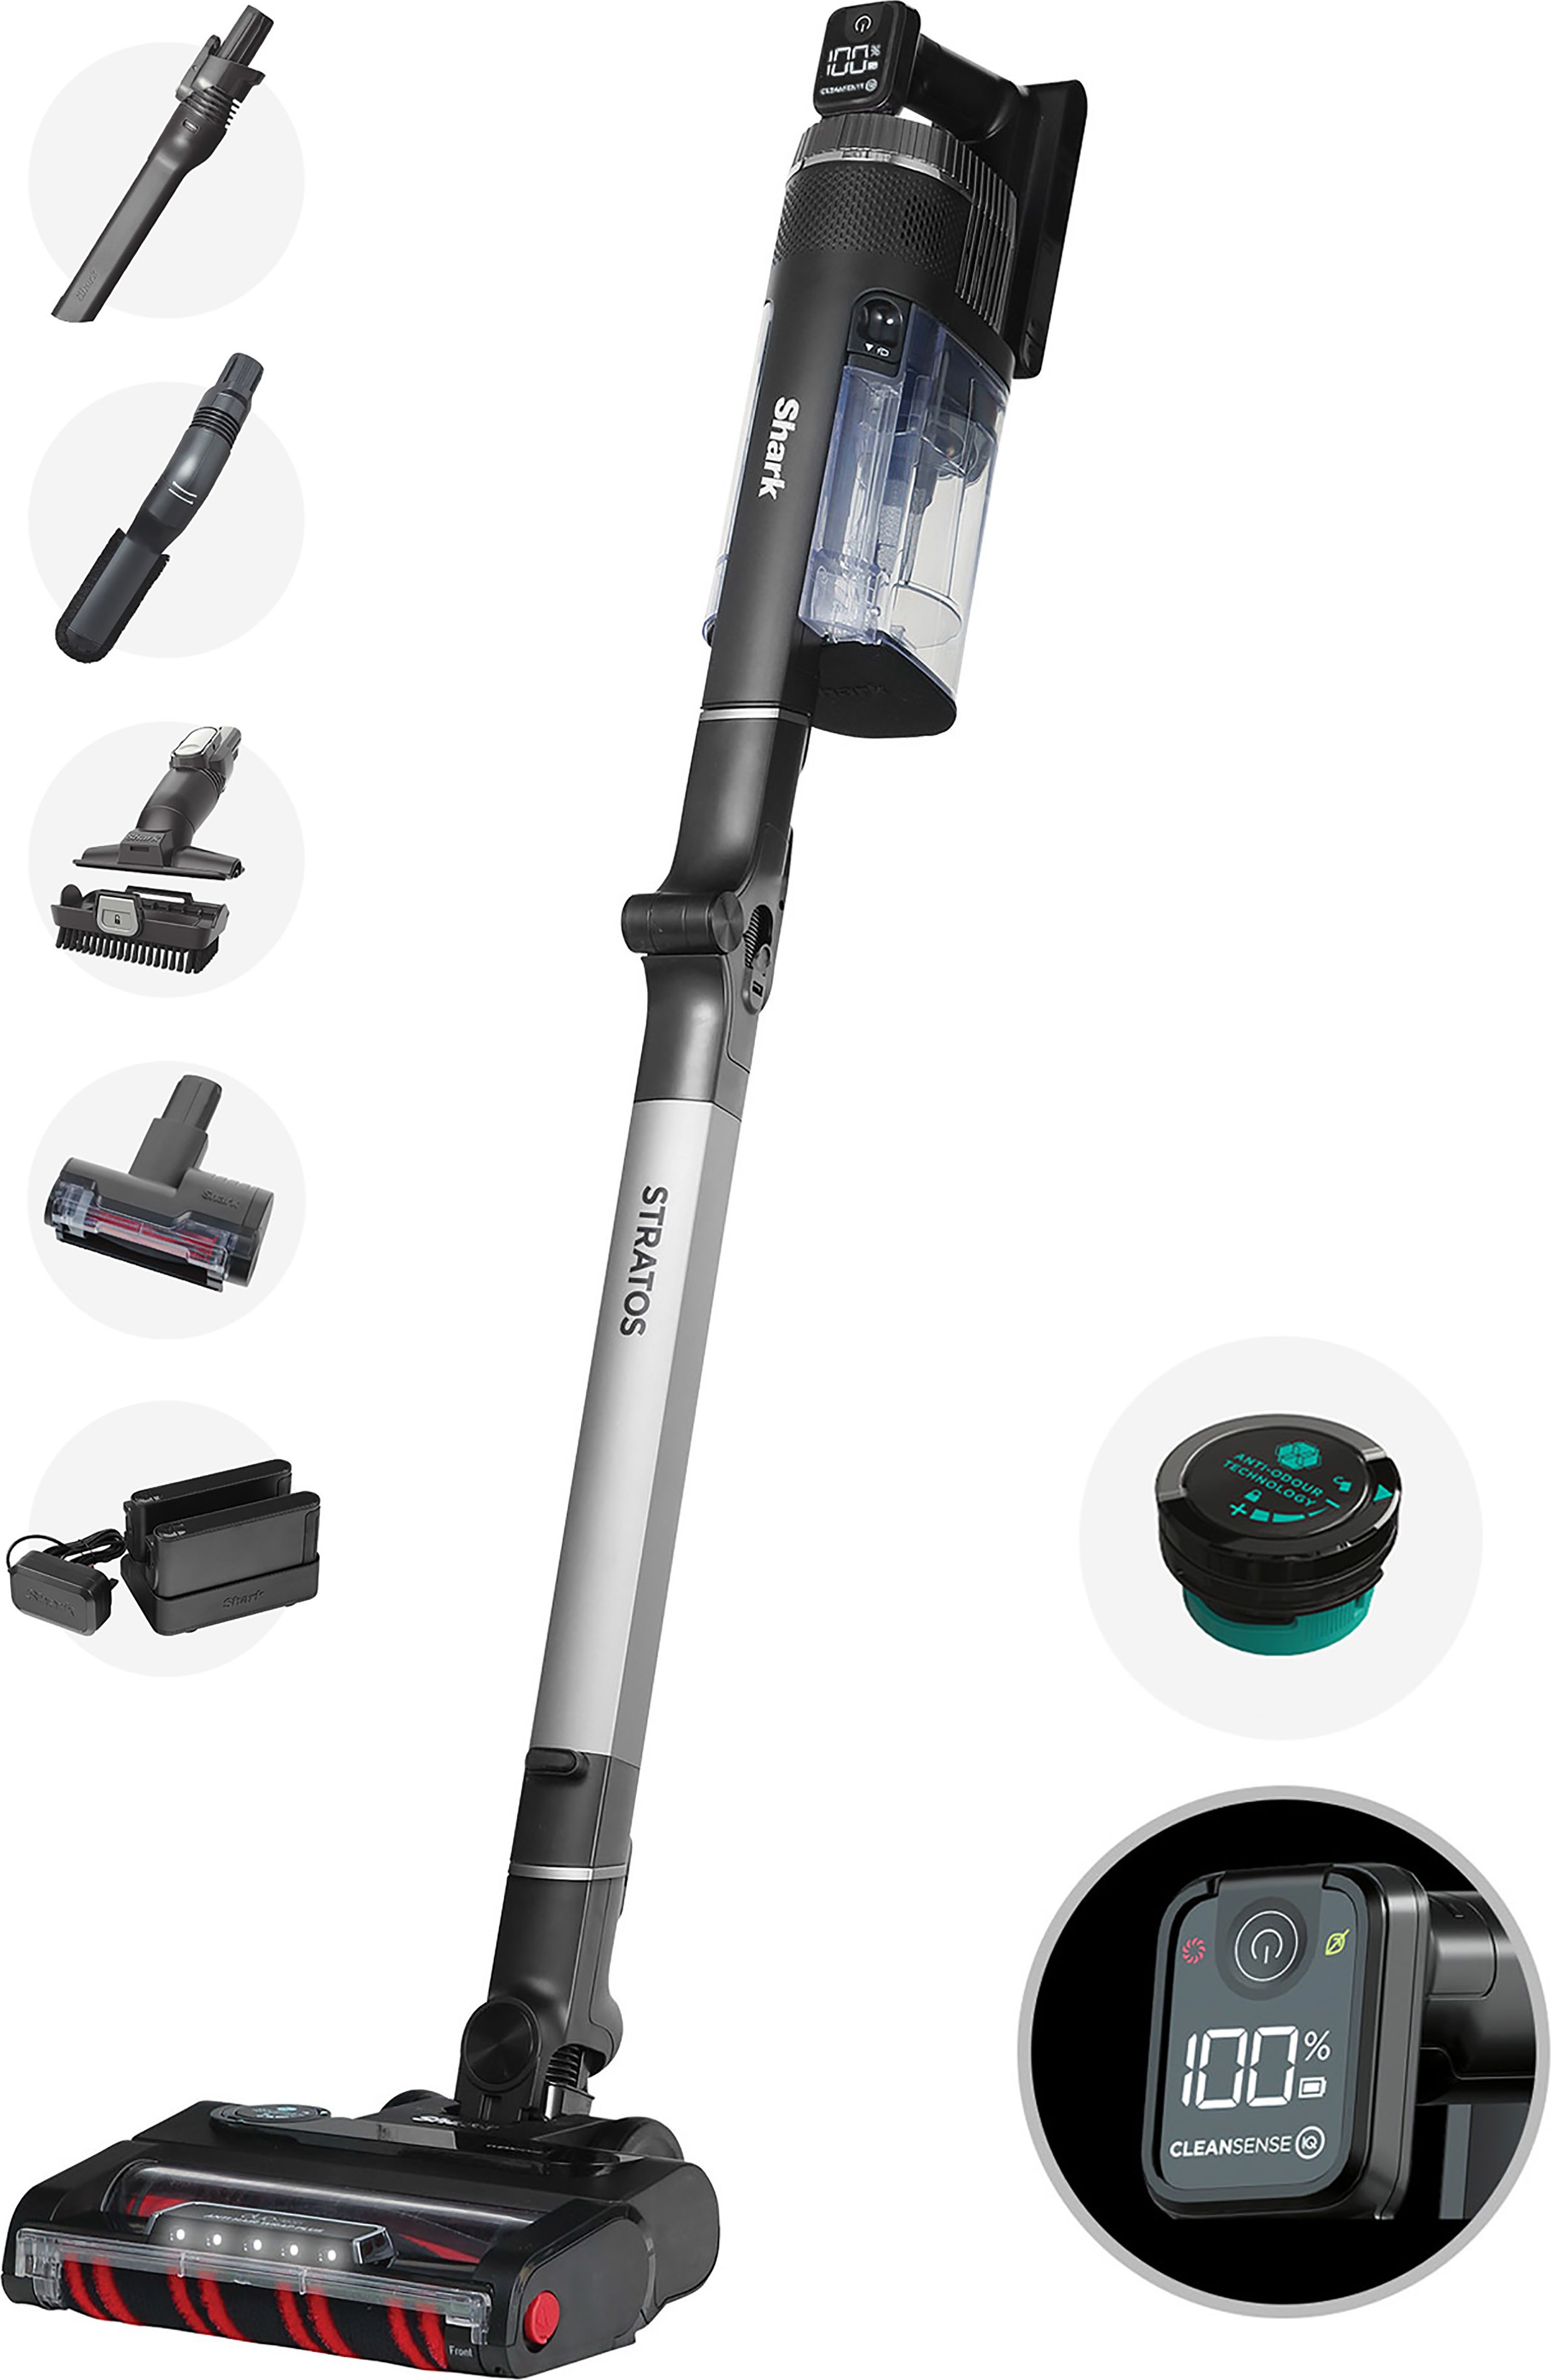 Shark Stratos with Anti-Hair Wrap Plus & Clean Sense IQ IZ420UKT Cordless Vacuum Cleaner with up to 120 Minutes Run Time - Charcoal Grey / Silver, Charcoal Grey / Silver